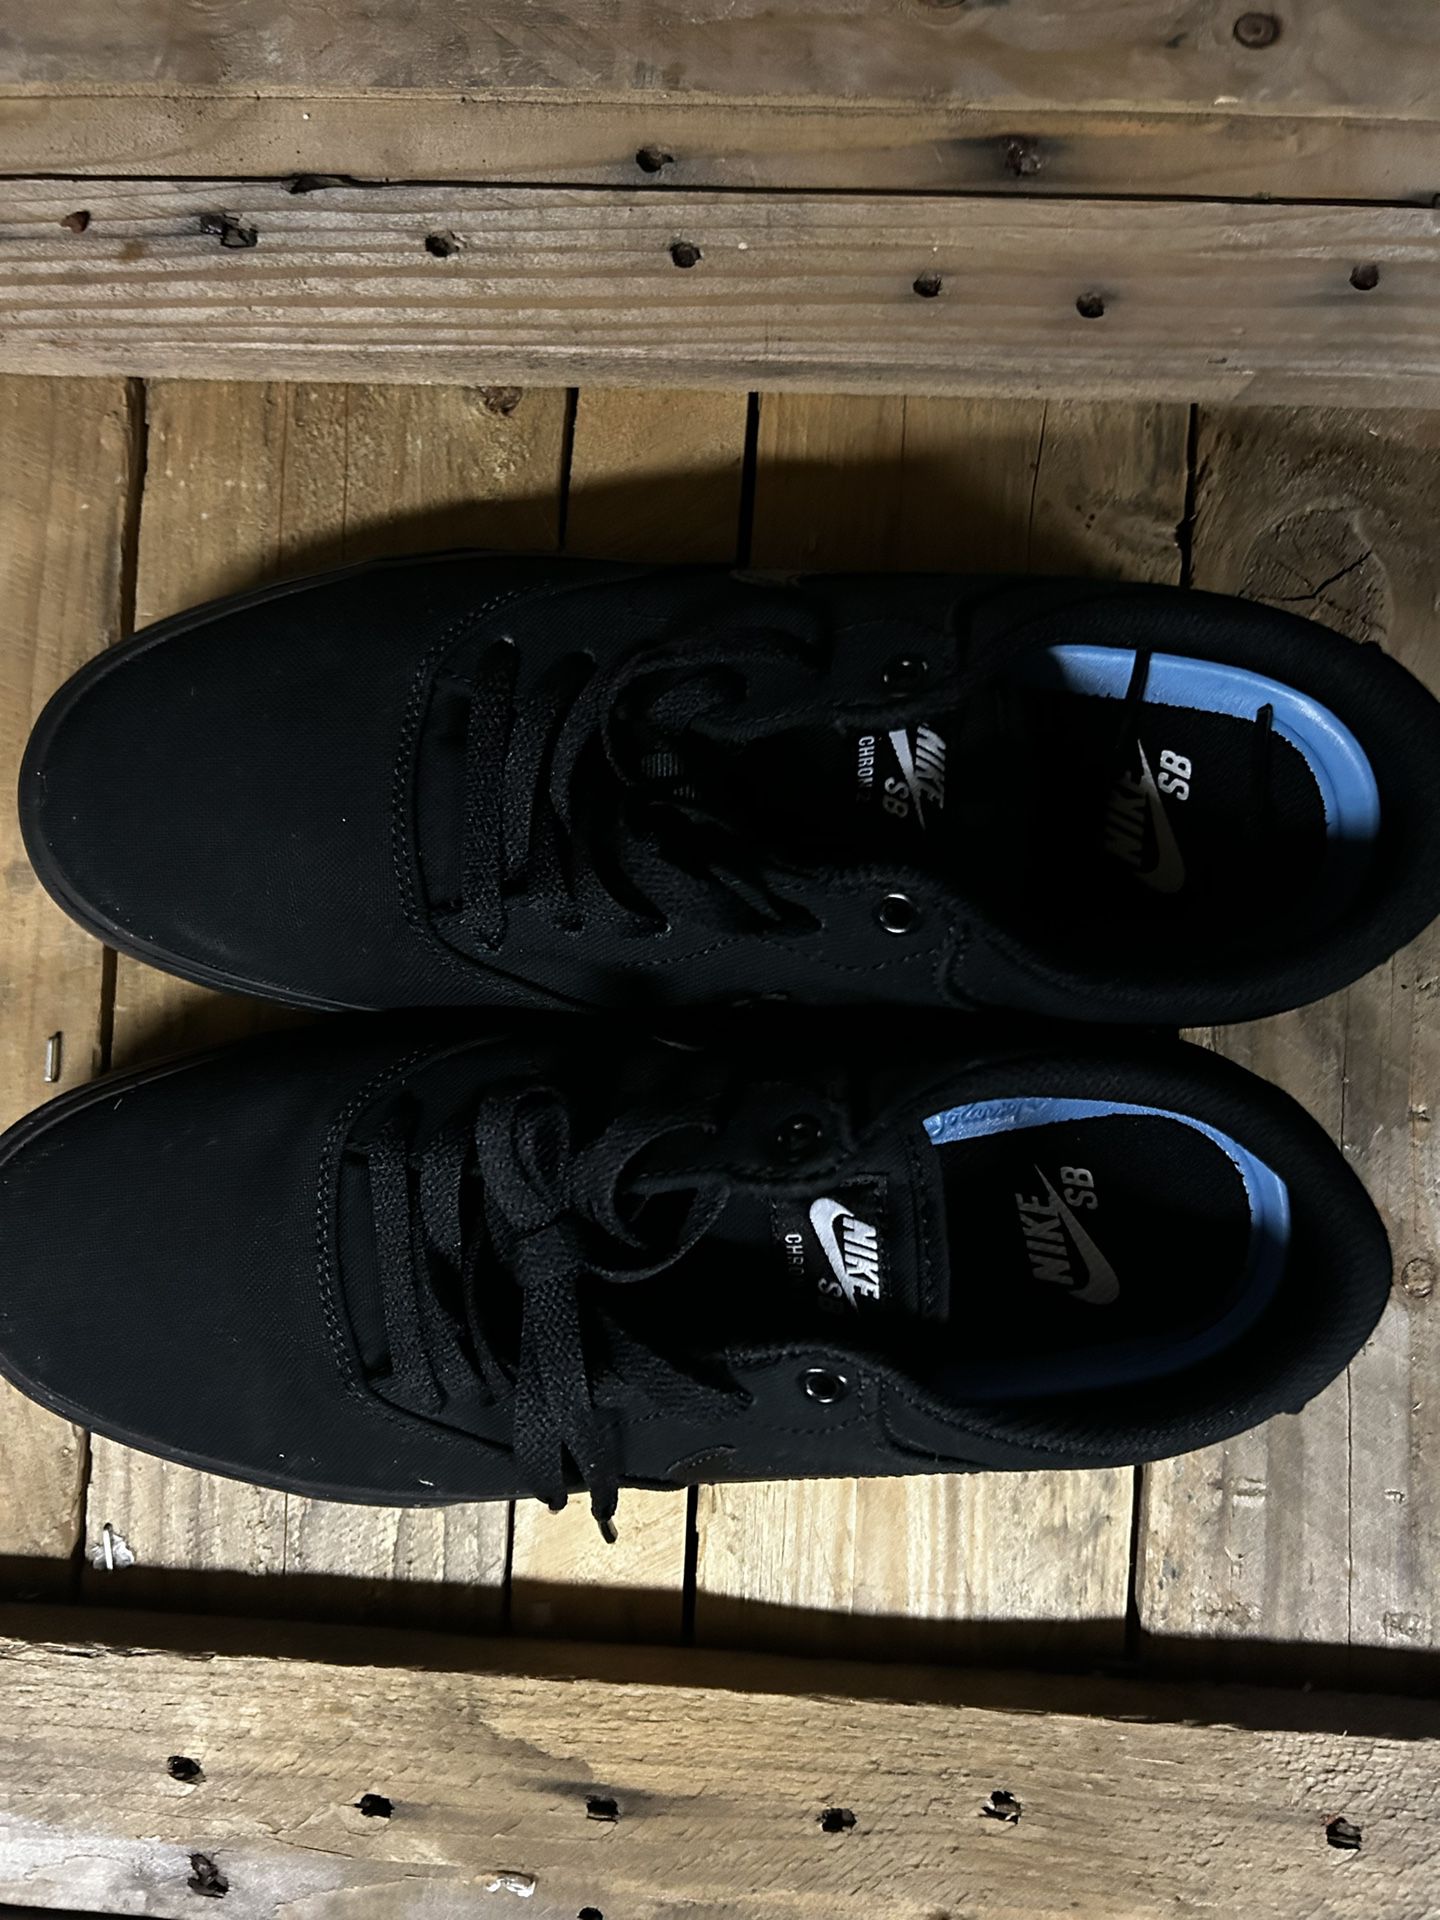 Nike Chron 2 Black Canvas Skate Shoes Size 9 for Sale in Spring Valley, CA -